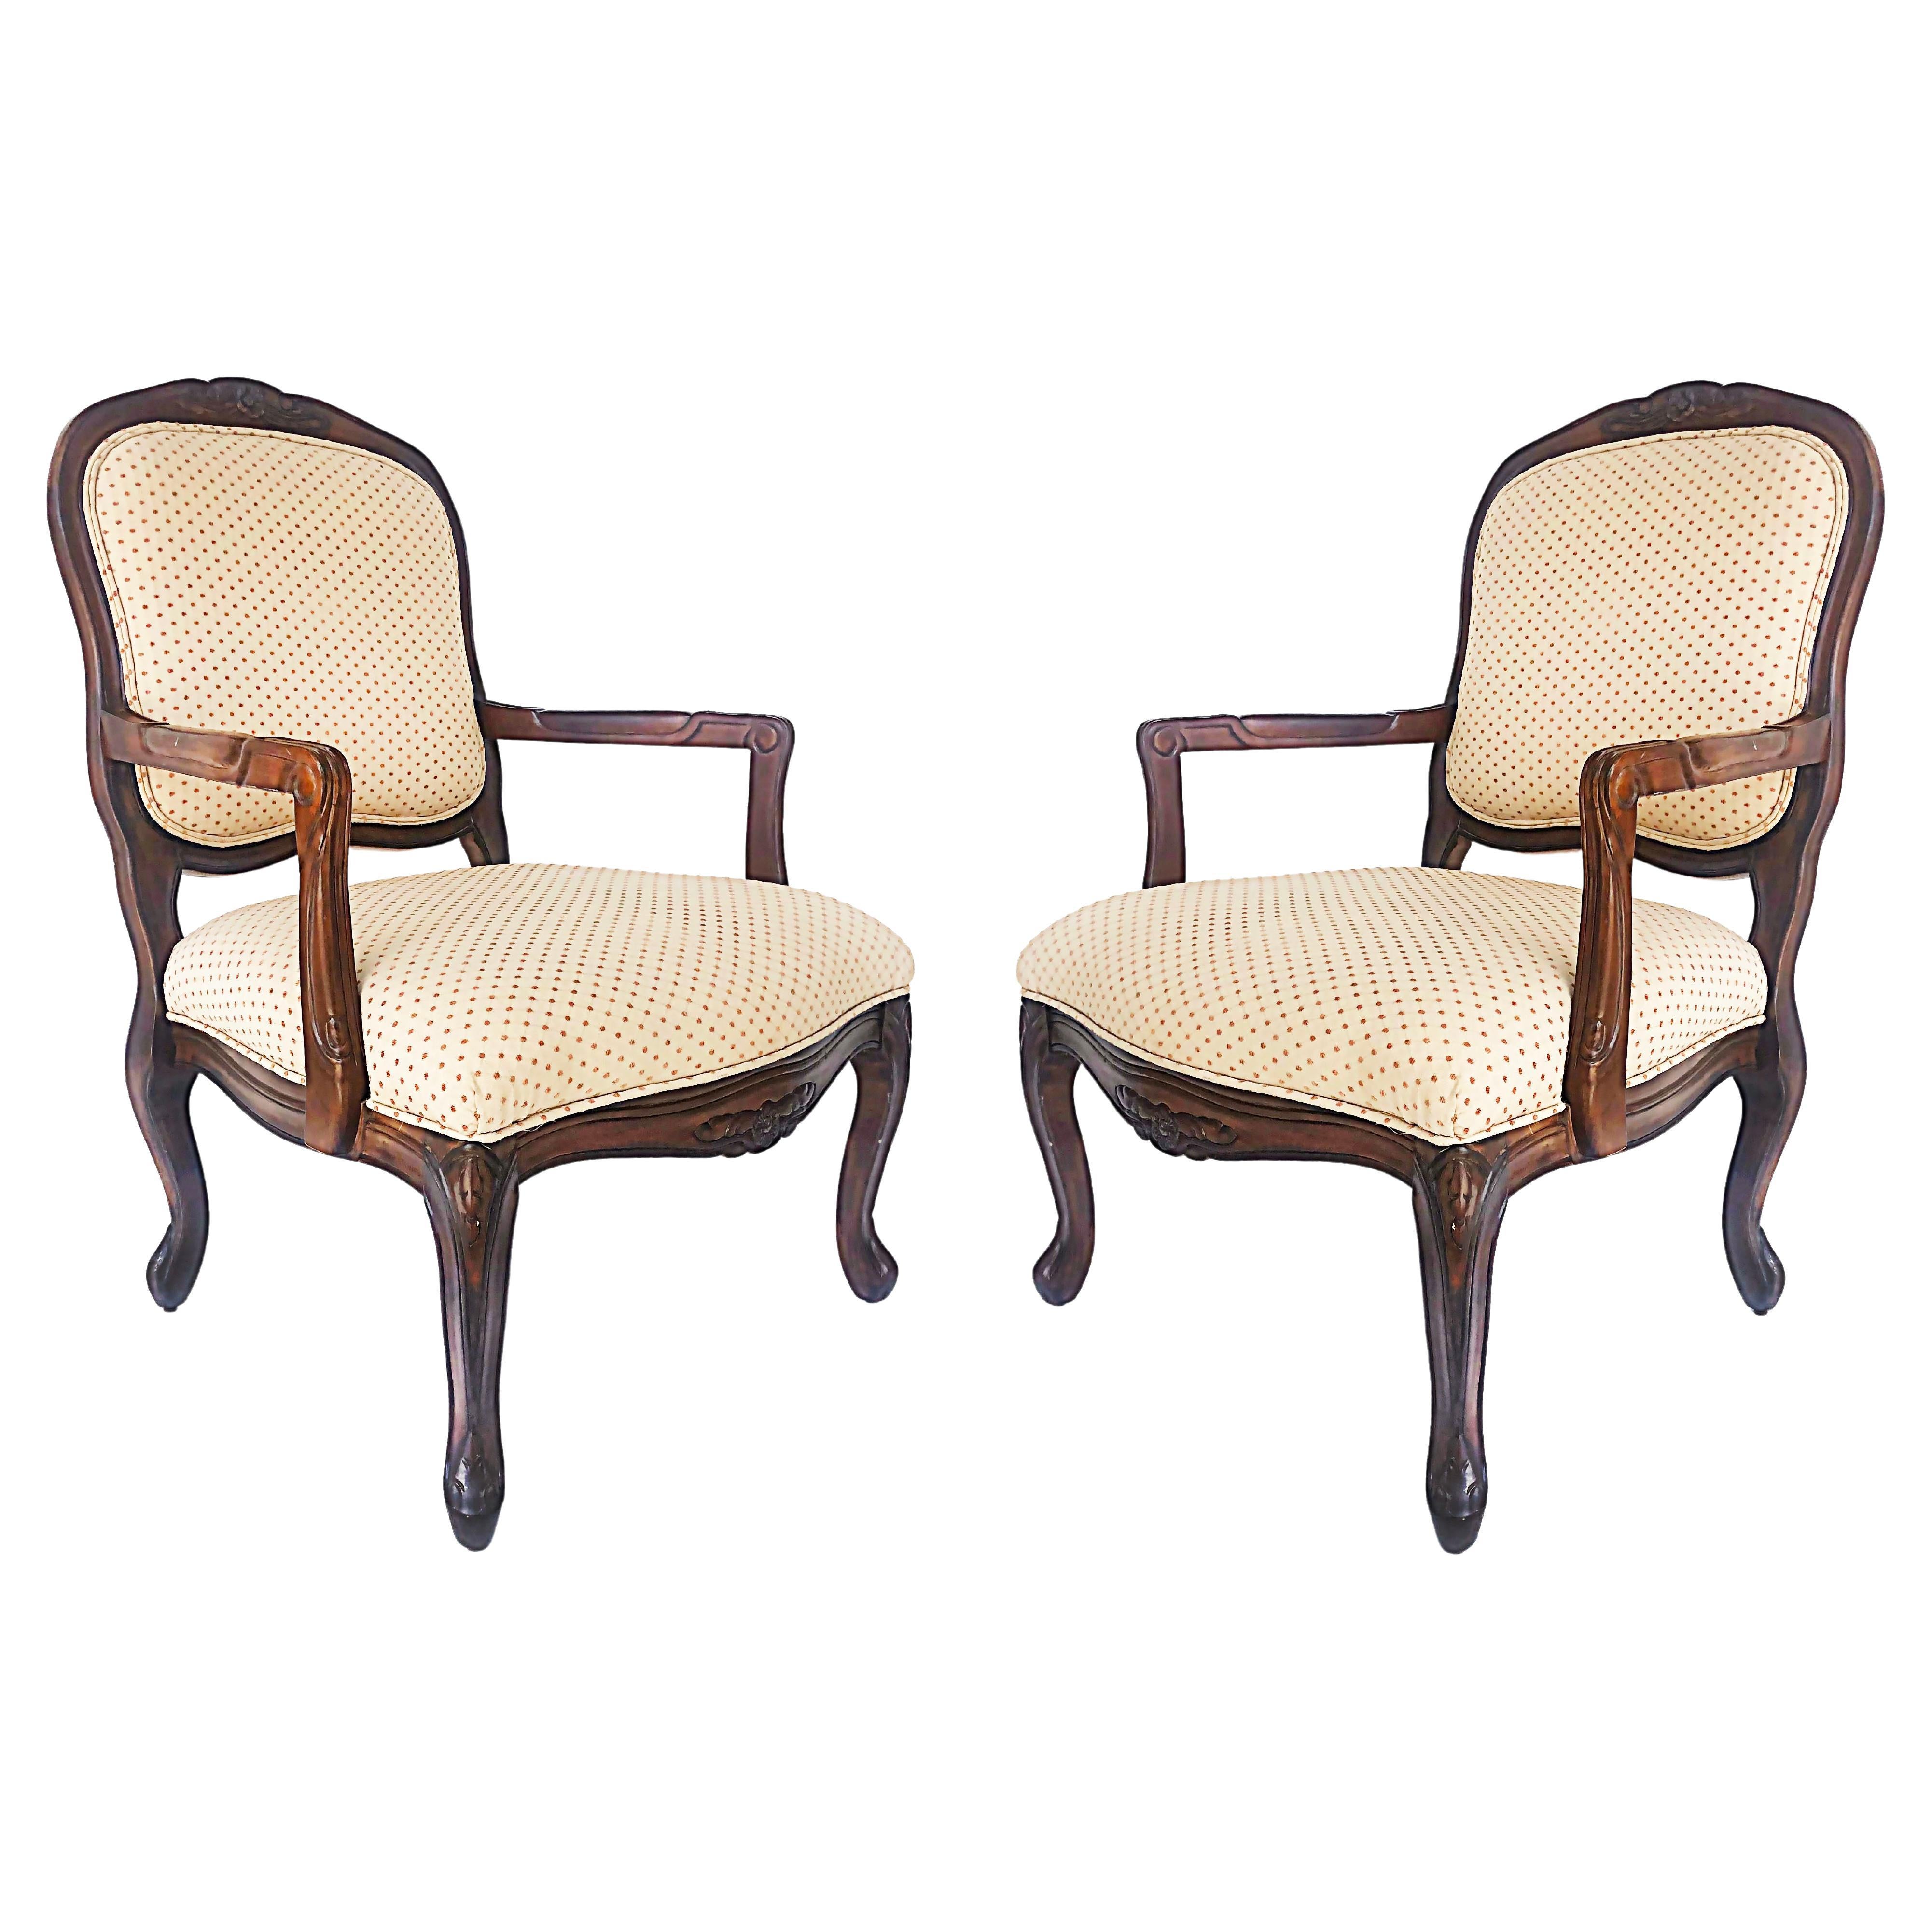 French Provincial Louis XV Style Fauteuils with Cabriole Legs